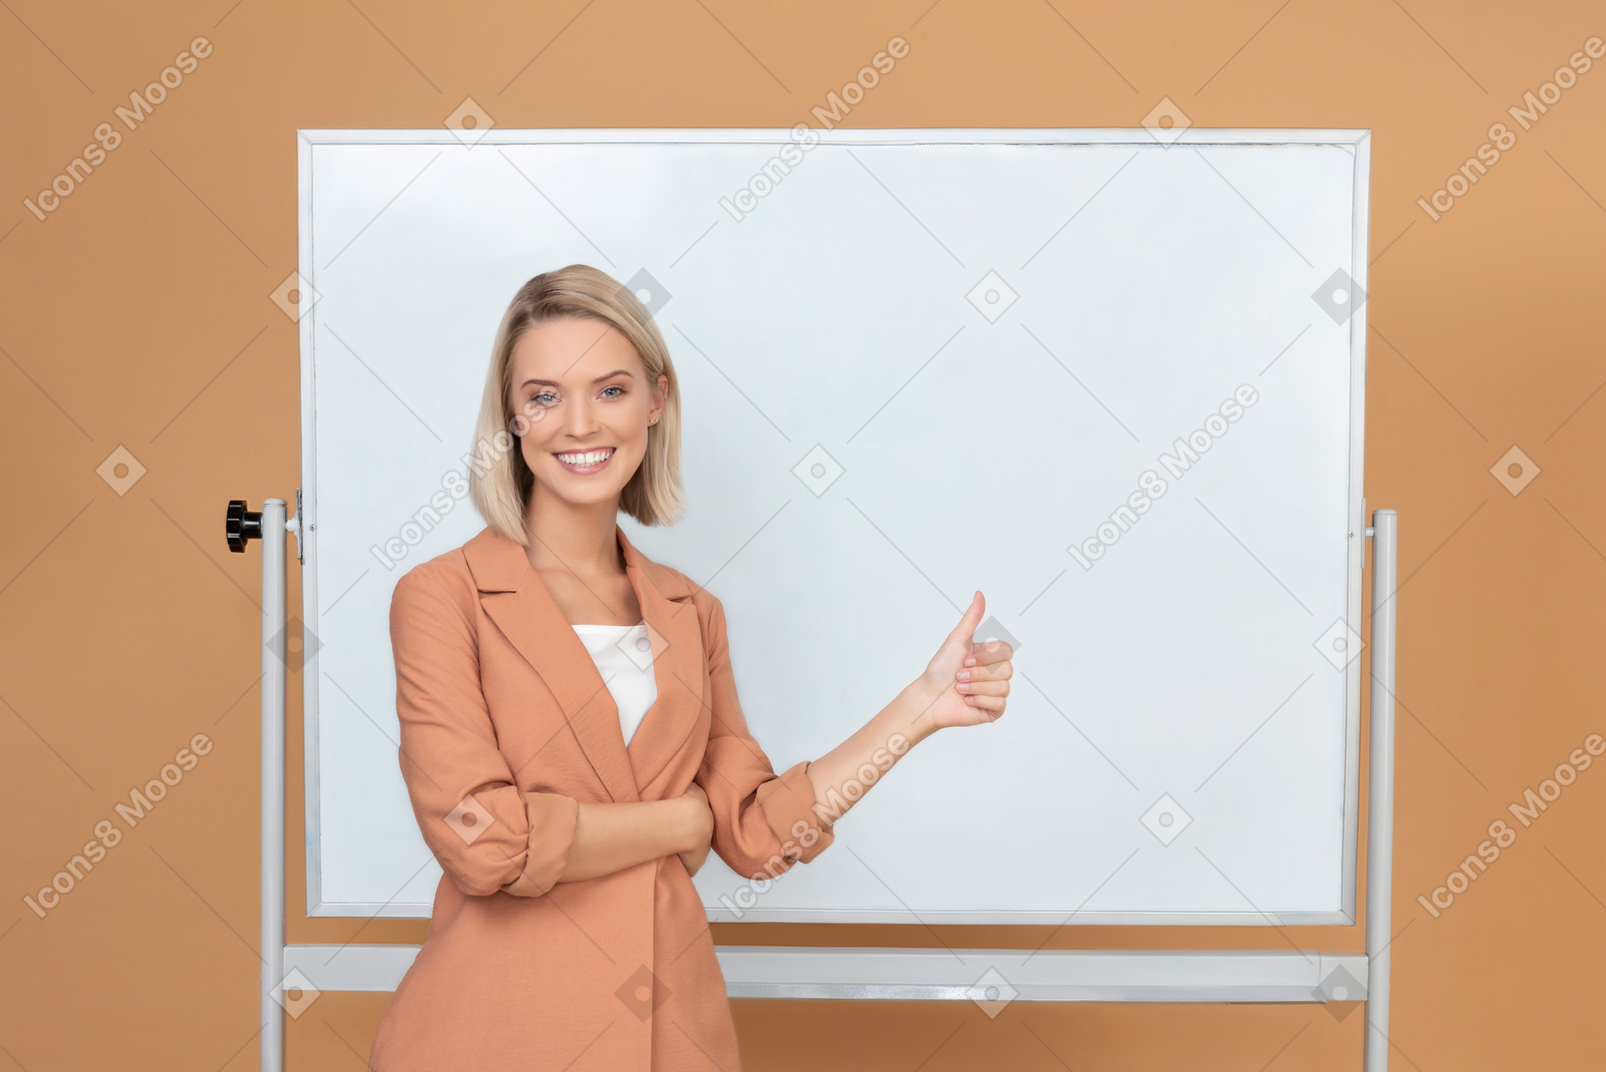 Smiling young woman standing next to a whiteboard and showing a thumb up